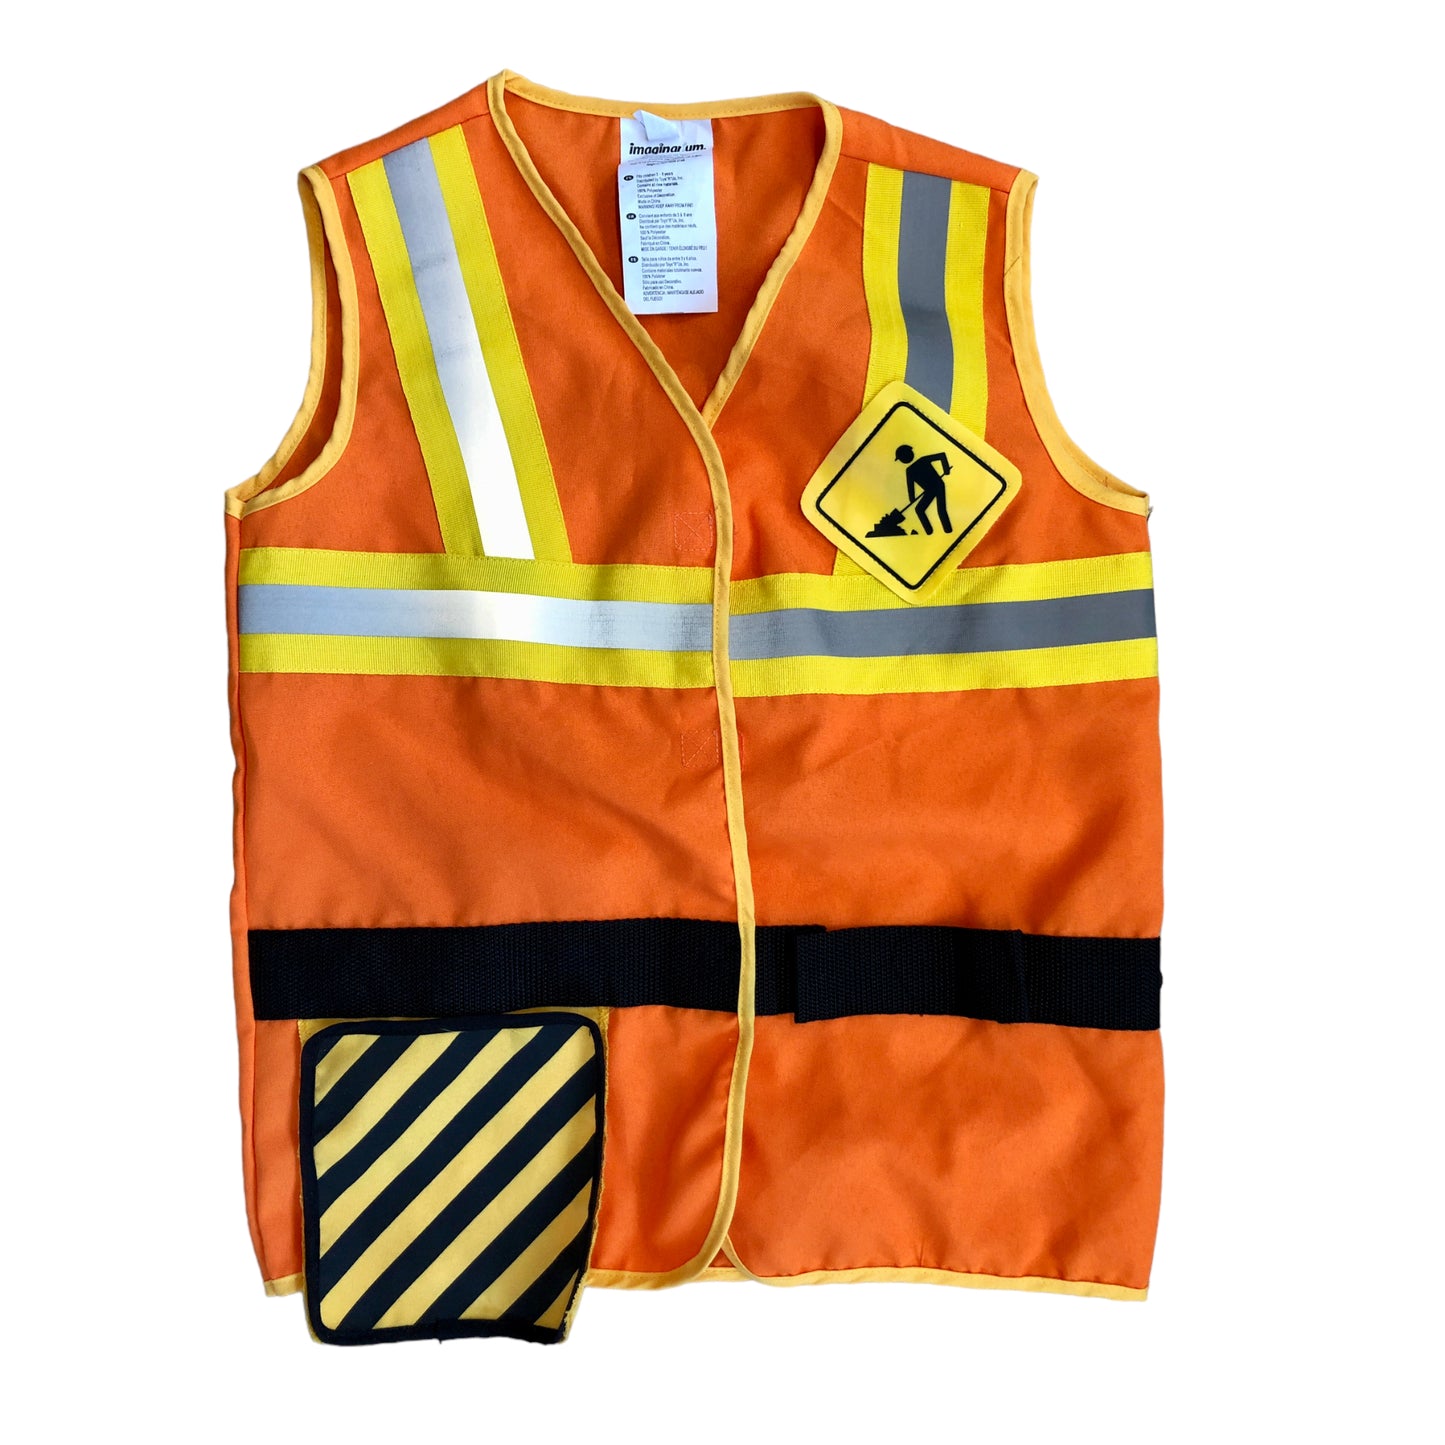 Construction worker costume vest (3/6 years old)